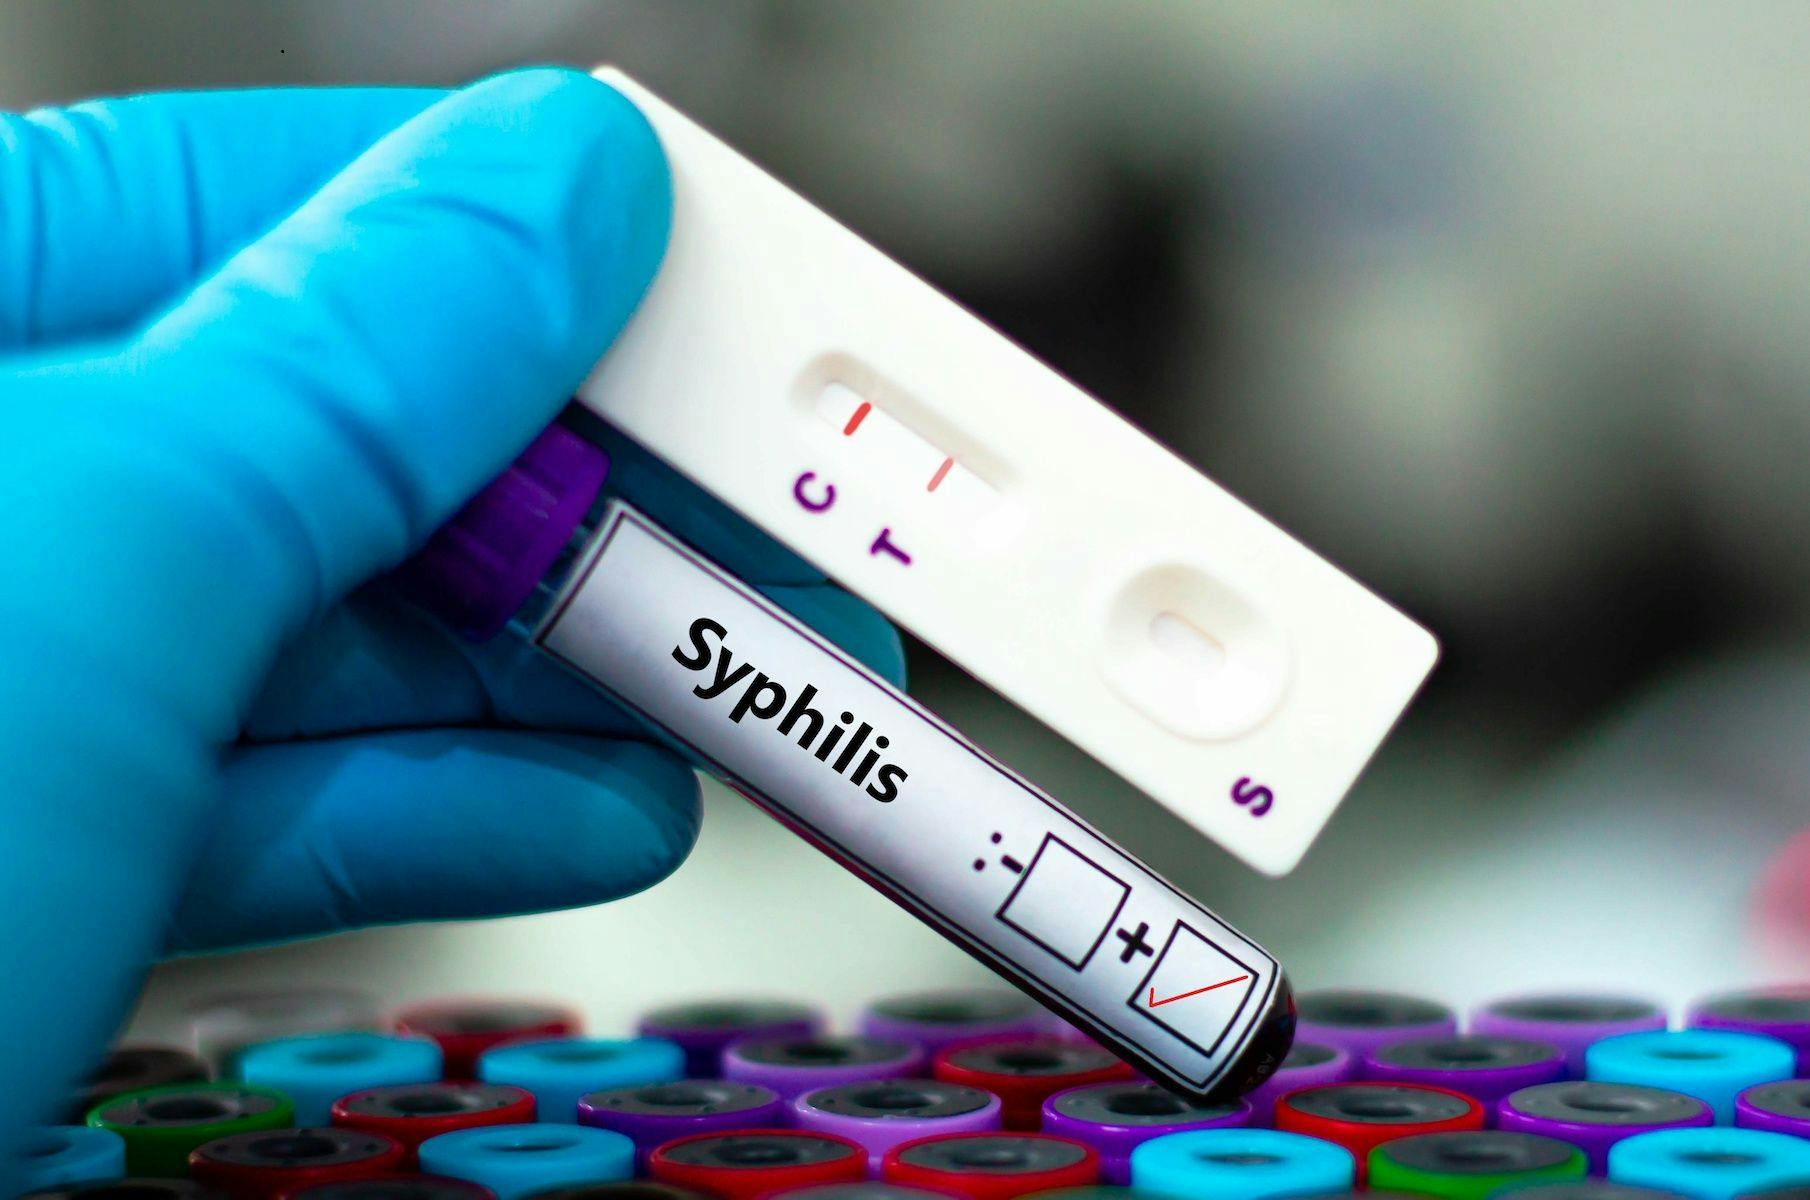 In 2022, the CDC reported a 60-year high of over 207,000 syphilis cases in the US. | image credit: kitsawet / stock.adobe.com